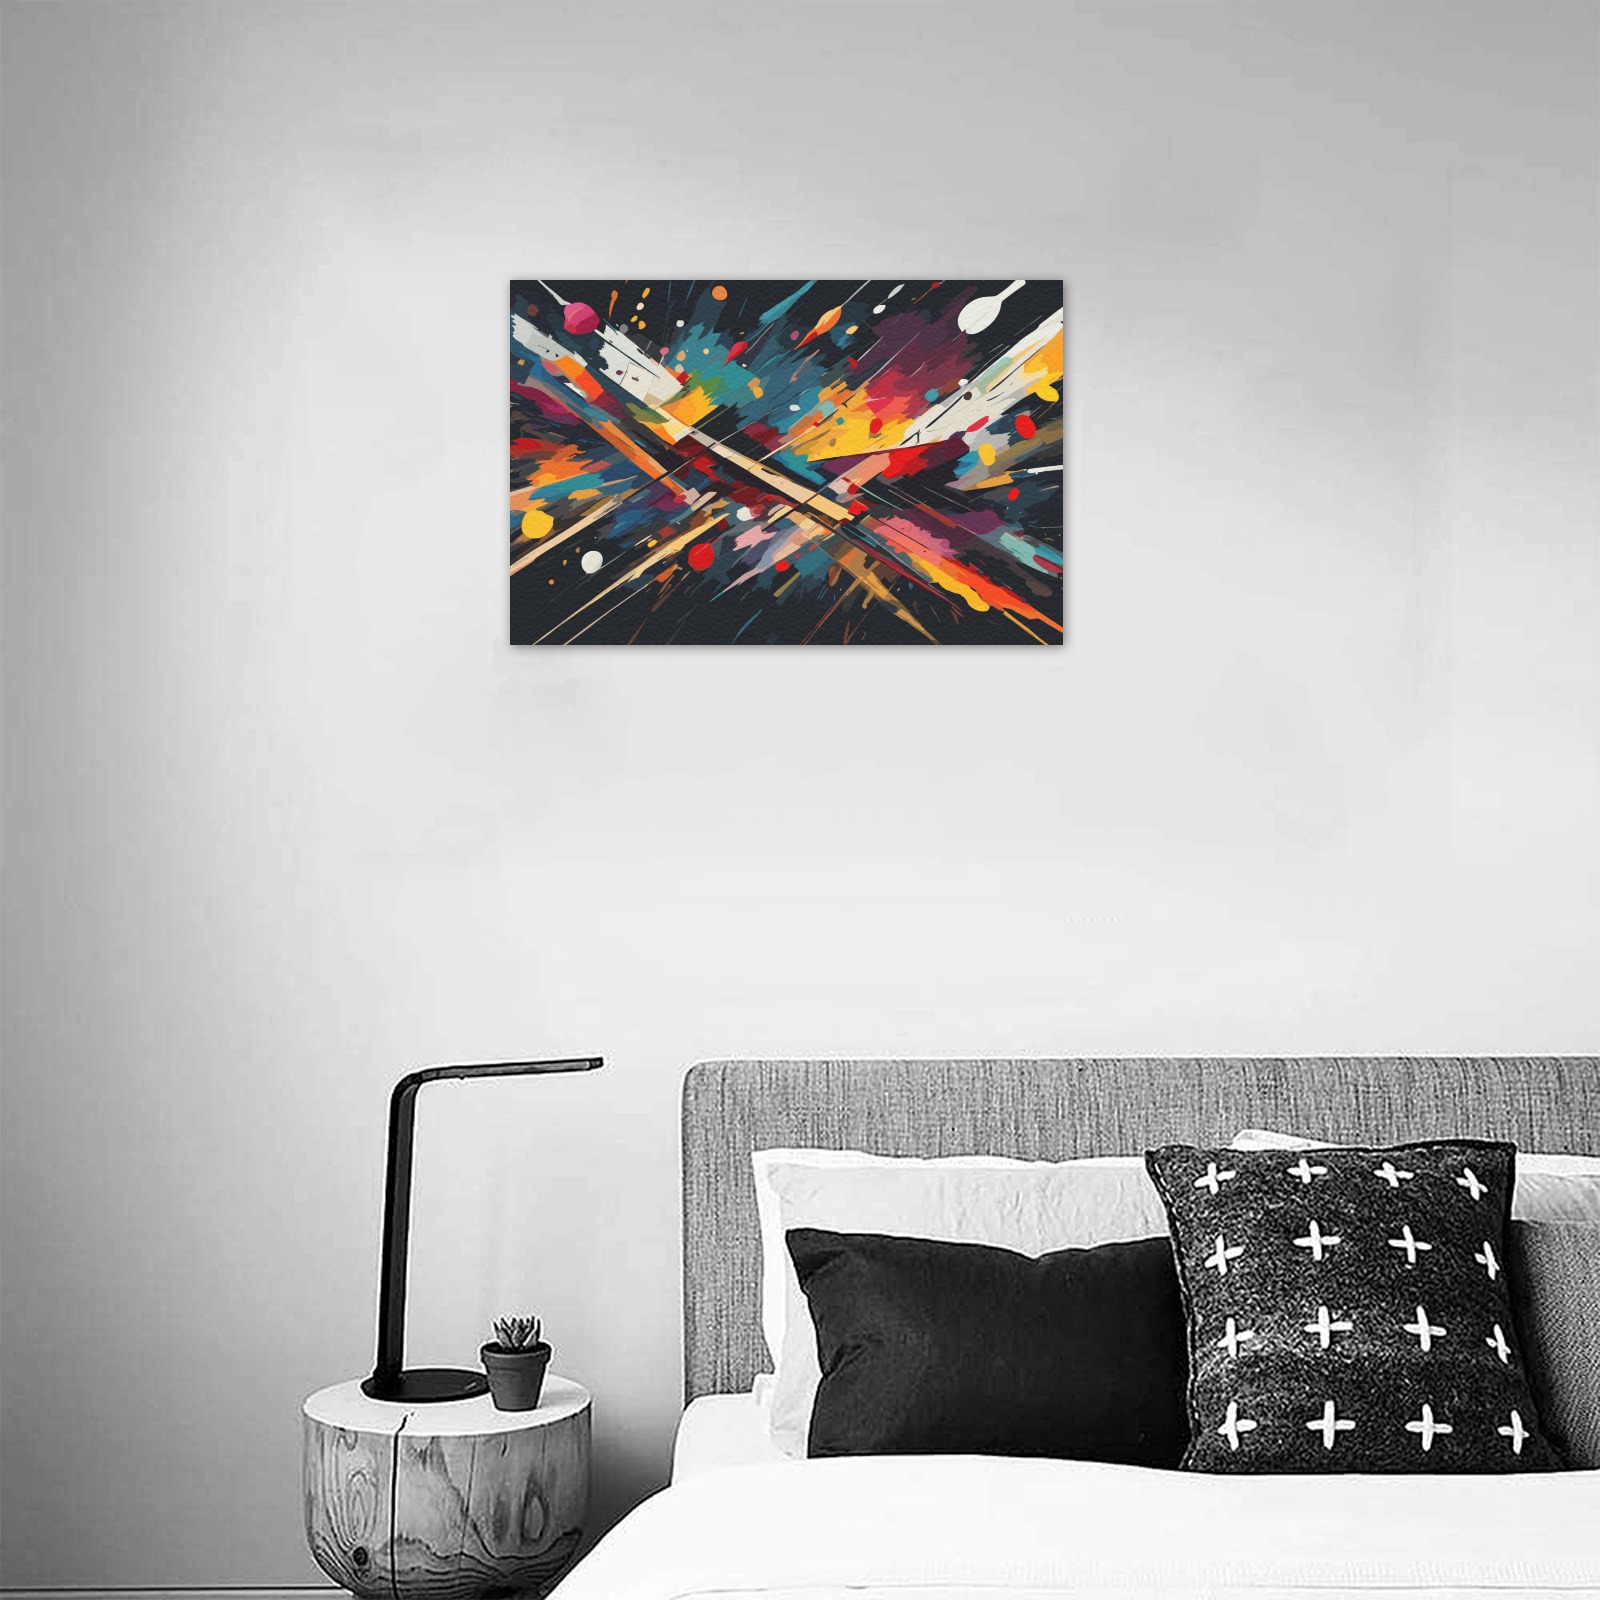 Lines of color abstract art on black background Upgraded Canvas Print 18"x12"